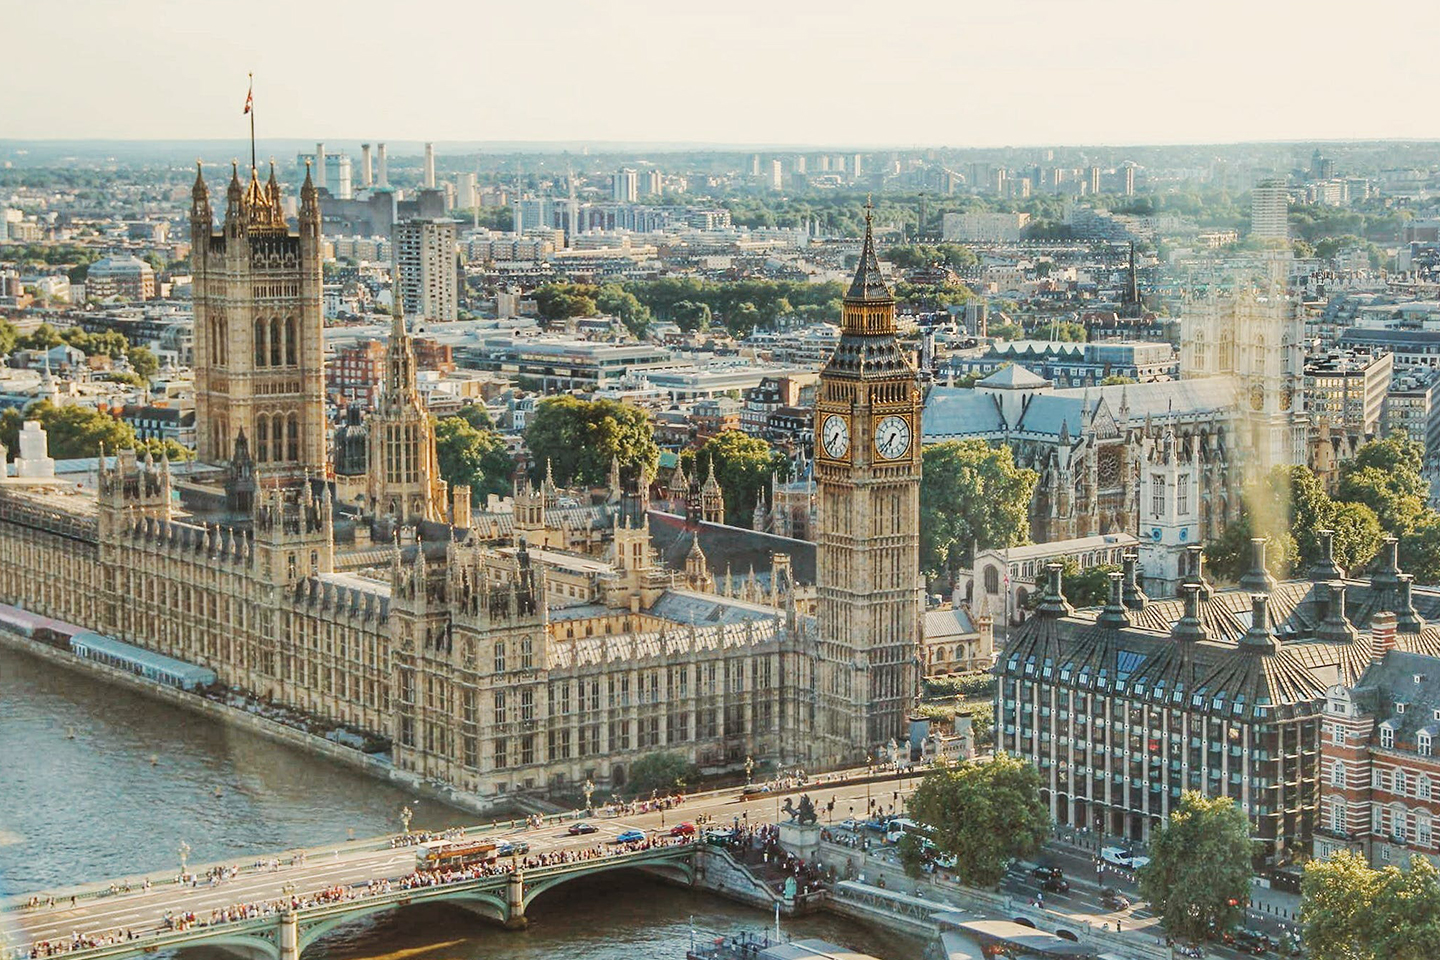 Views of the houses of parliament whilst up on the London eye. Partner Ed Wanambwa explores the Home Secretary’s proposed five-point plan to curb net migration.